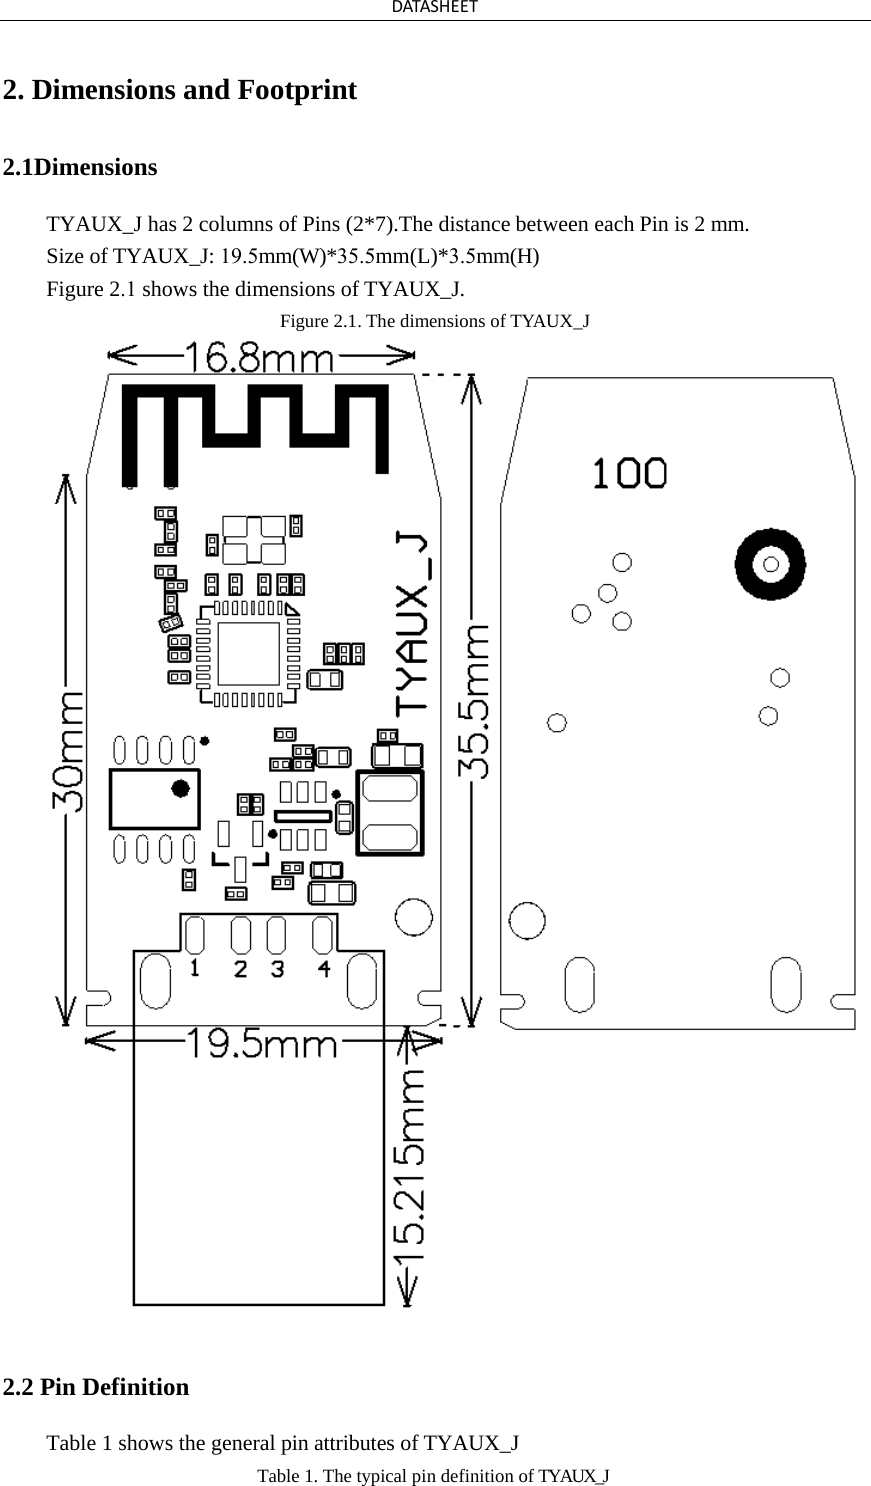 DATASHEET 2. Dimensions and Footprint2.1Dimensions TYAUX_J has 2 columns of Pins (2*7).The distance between each Pin is 2 mm. Size of TYAUX_J: 19.5mm(W)*35.5mm(L)*3.5mm(H) Figure 2.1 shows the dimensions of TYAUX_J. Figure 2.1. The dimensions of TYAUX_J 2.2 Pin Definition Table 1 shows the general pin attributes of TYAUX_J Table 1. The typical pin definition of TYAUX_J 